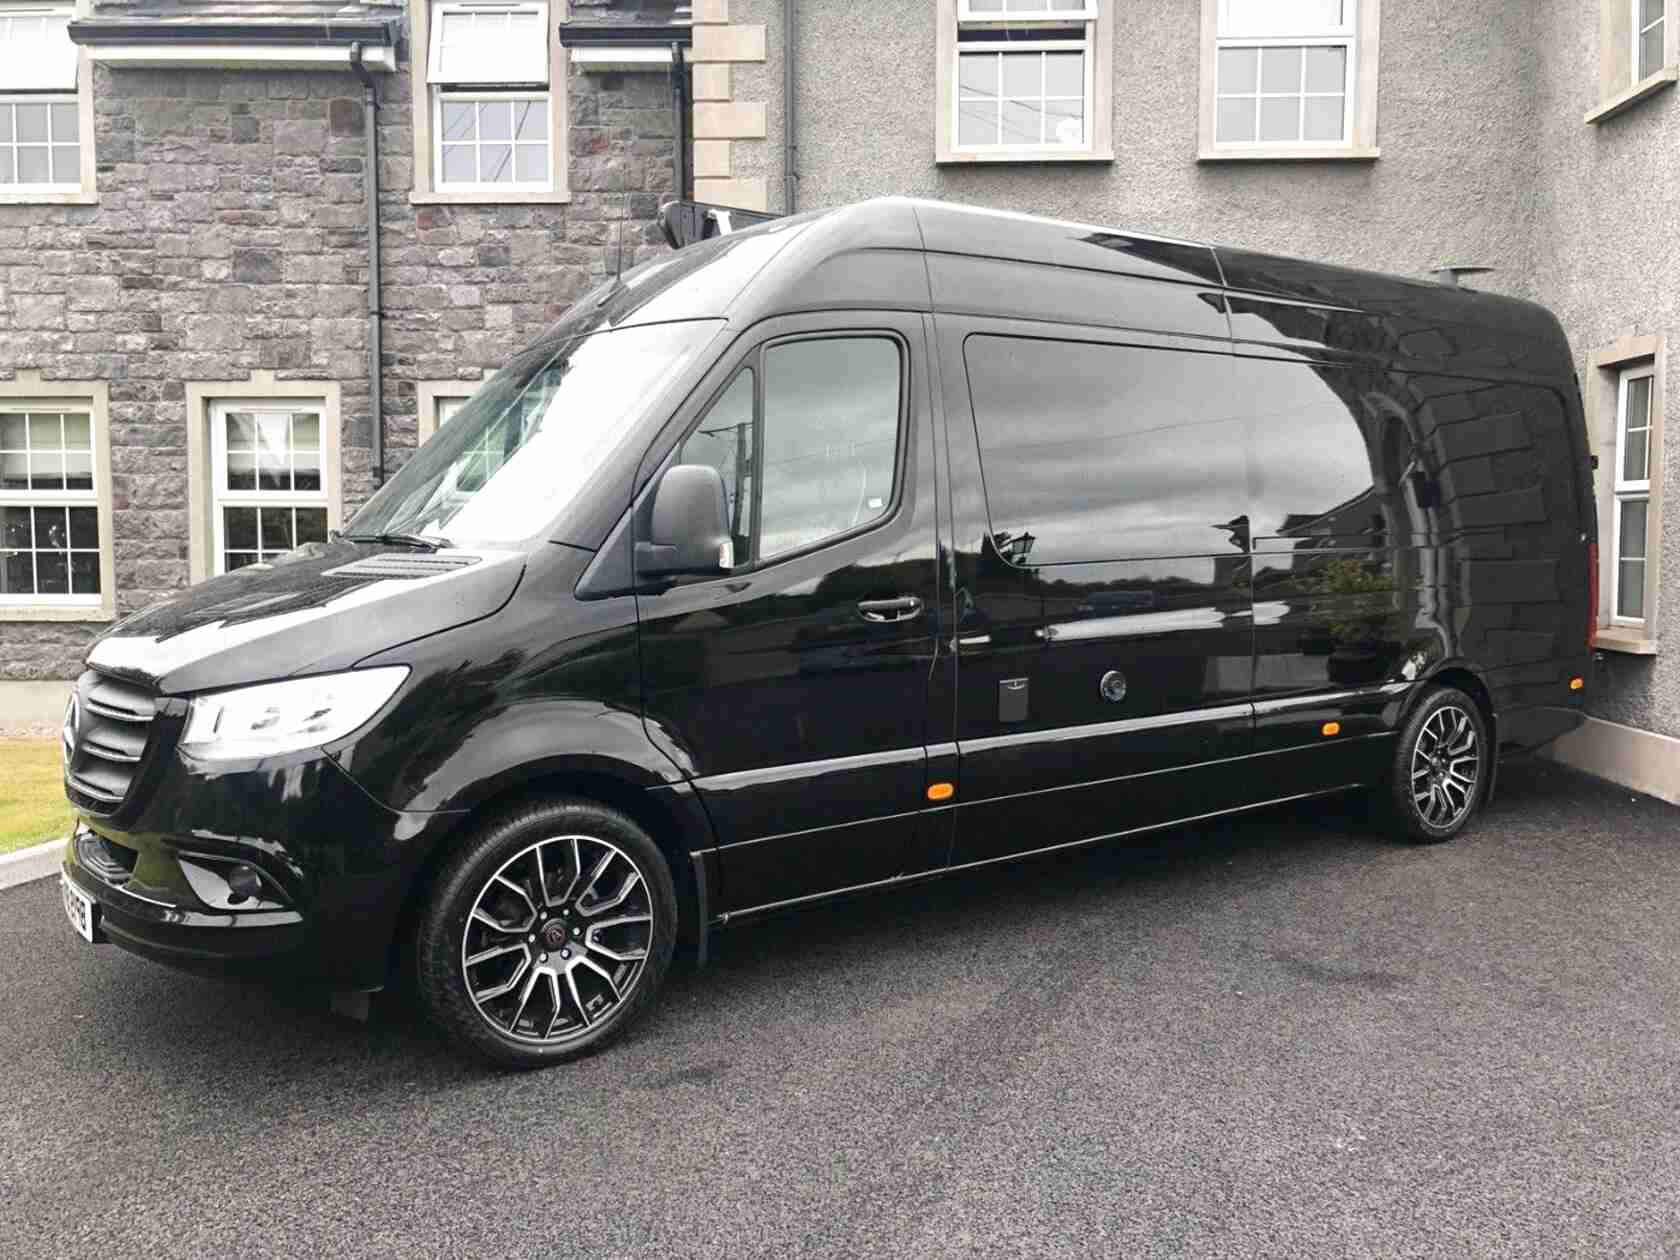 private race vans for sale